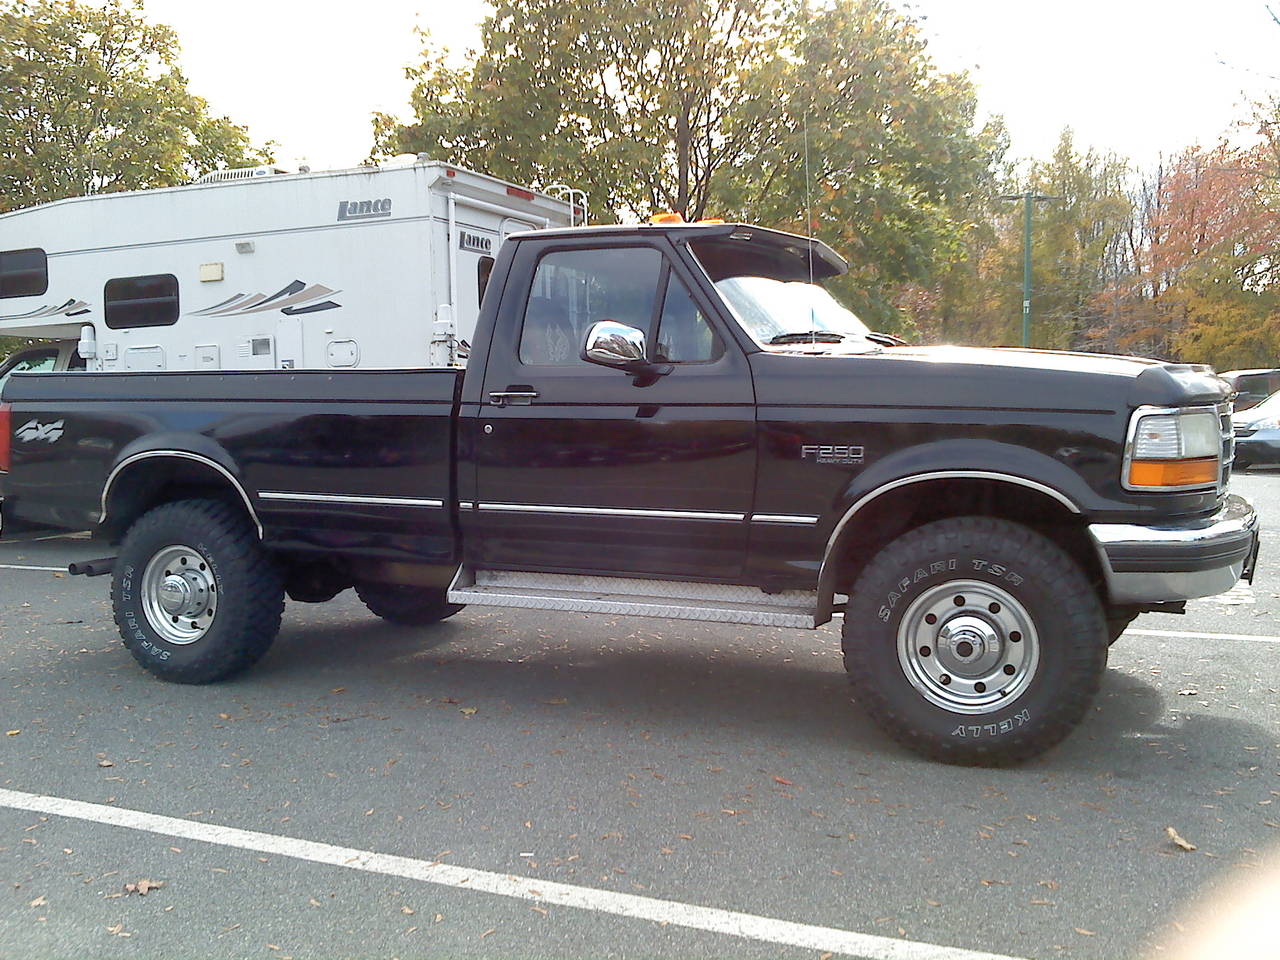 Truck_at_yankee_candle_oct_22_2011